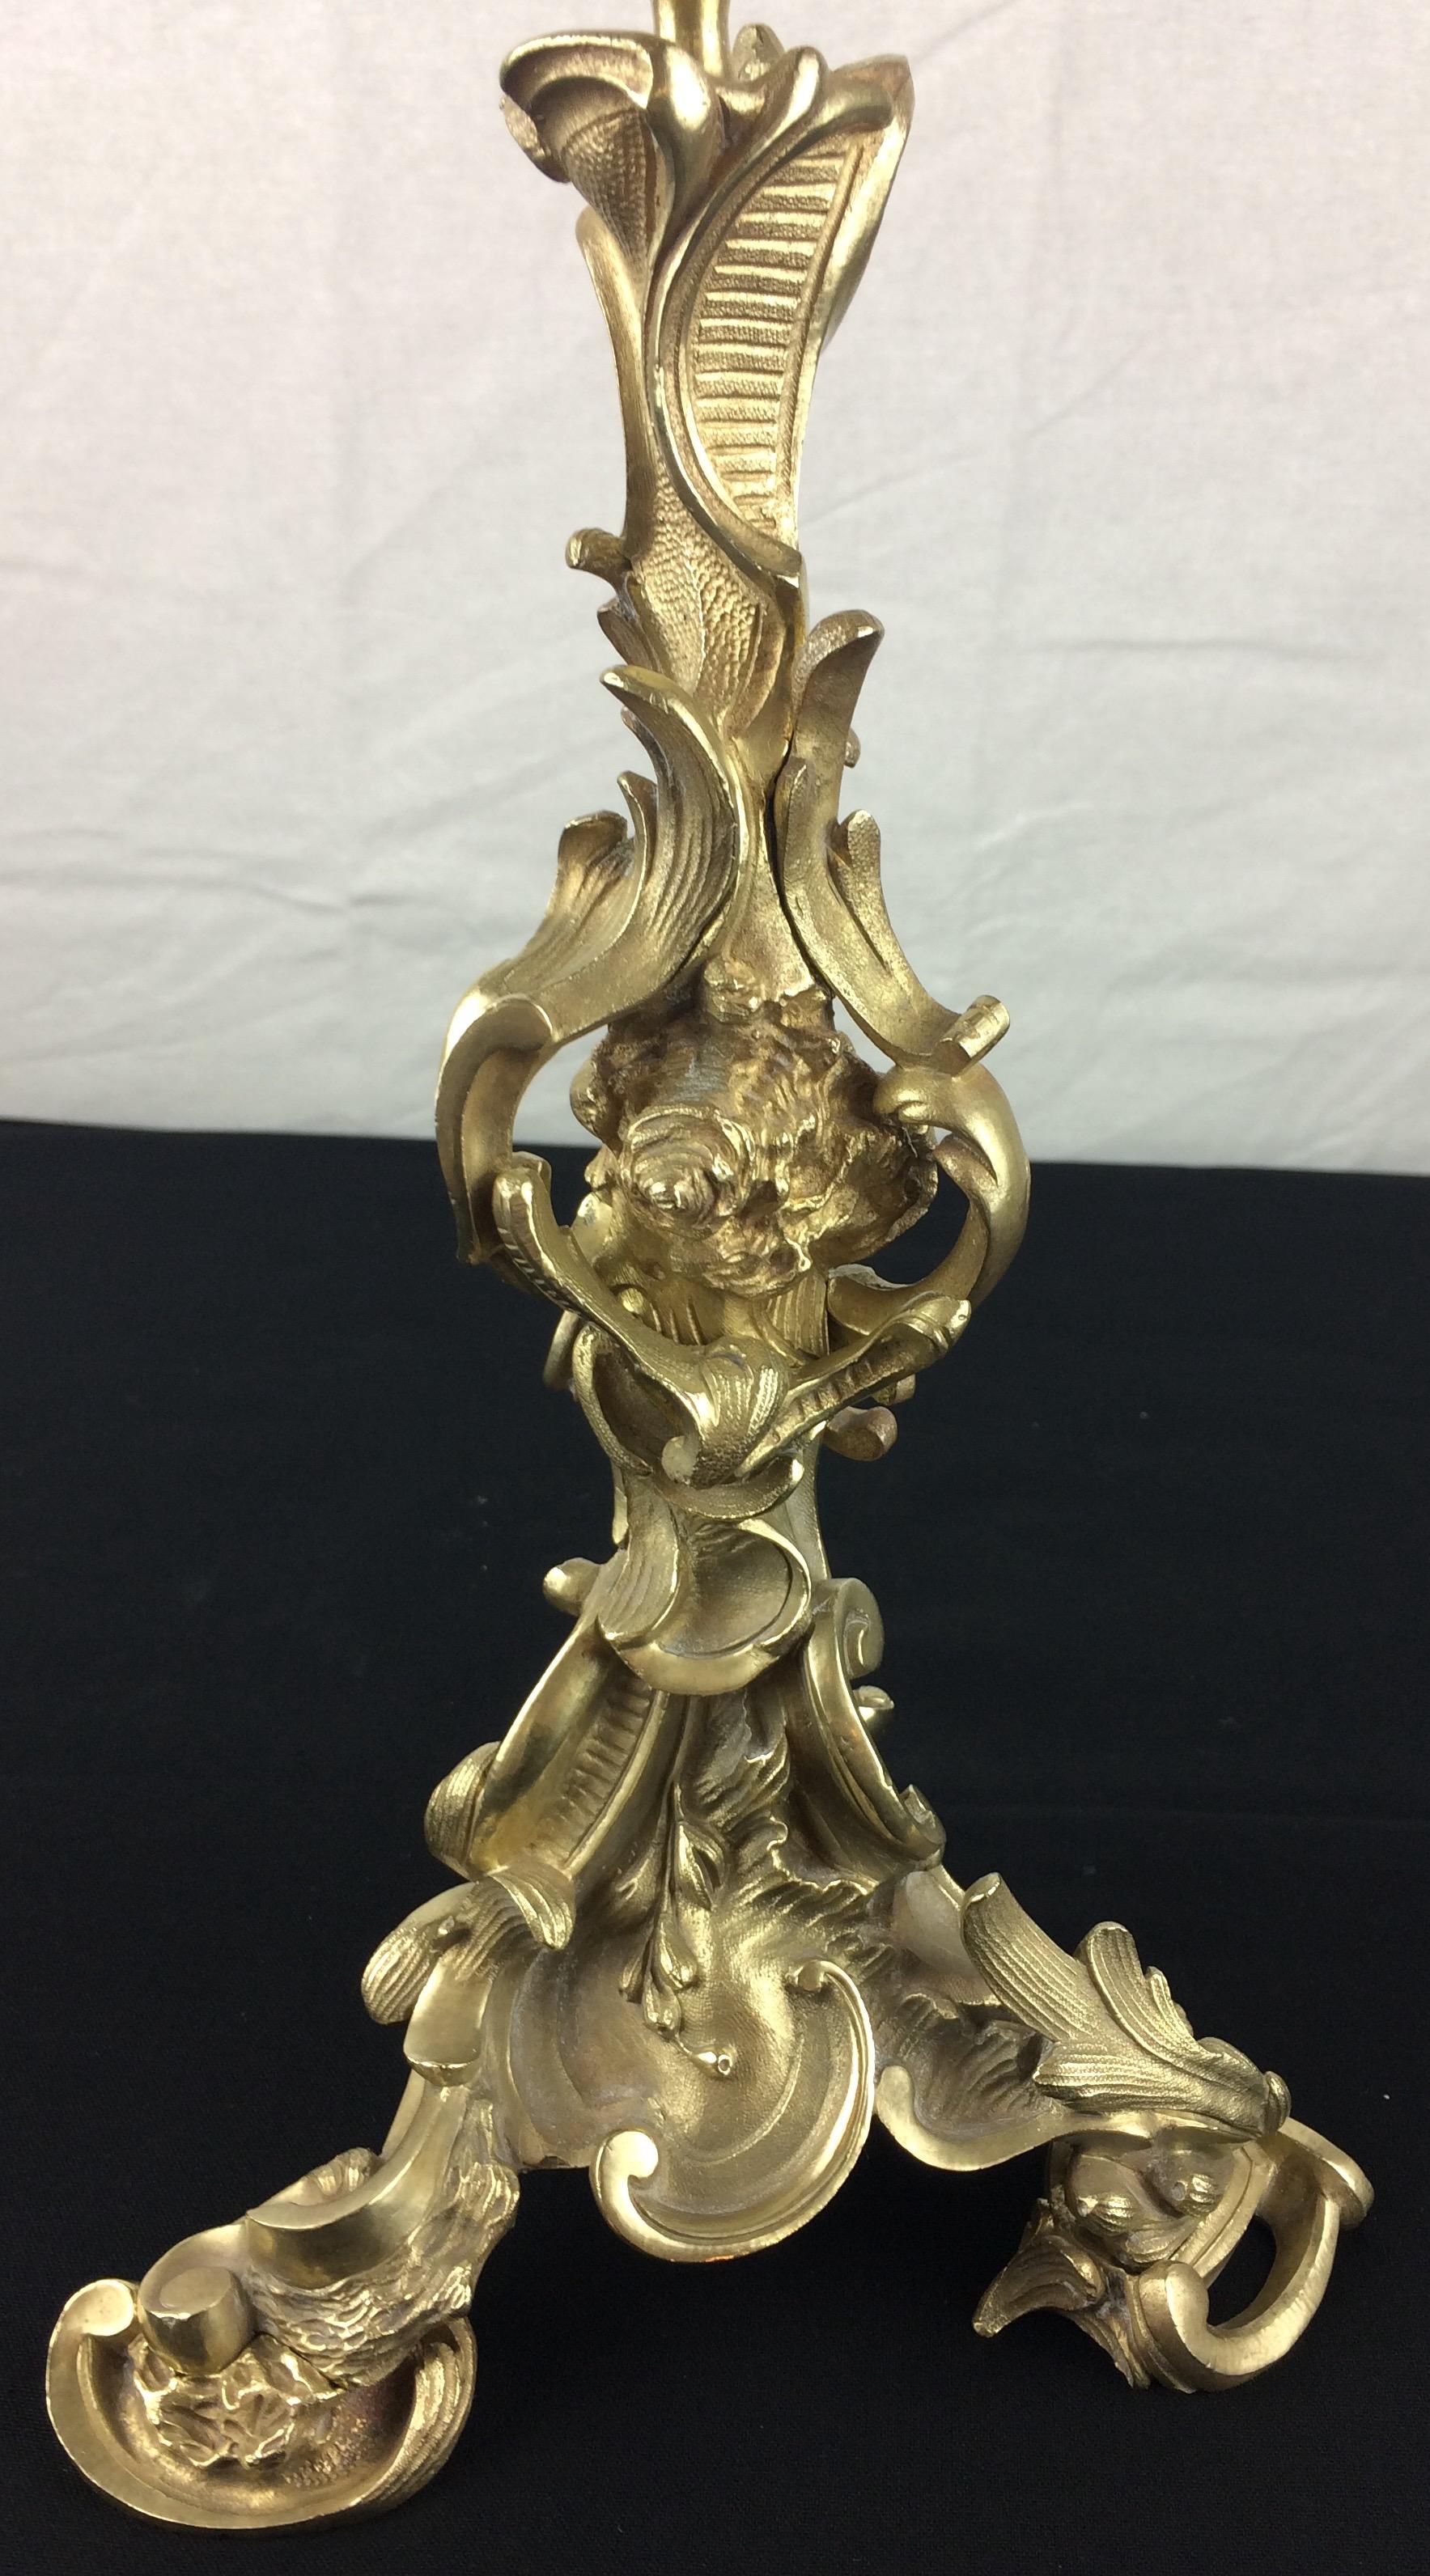 Very Fine Pair of 19th Century French Gilt Bronze Candelabras by Victor Raulin For Sale 1